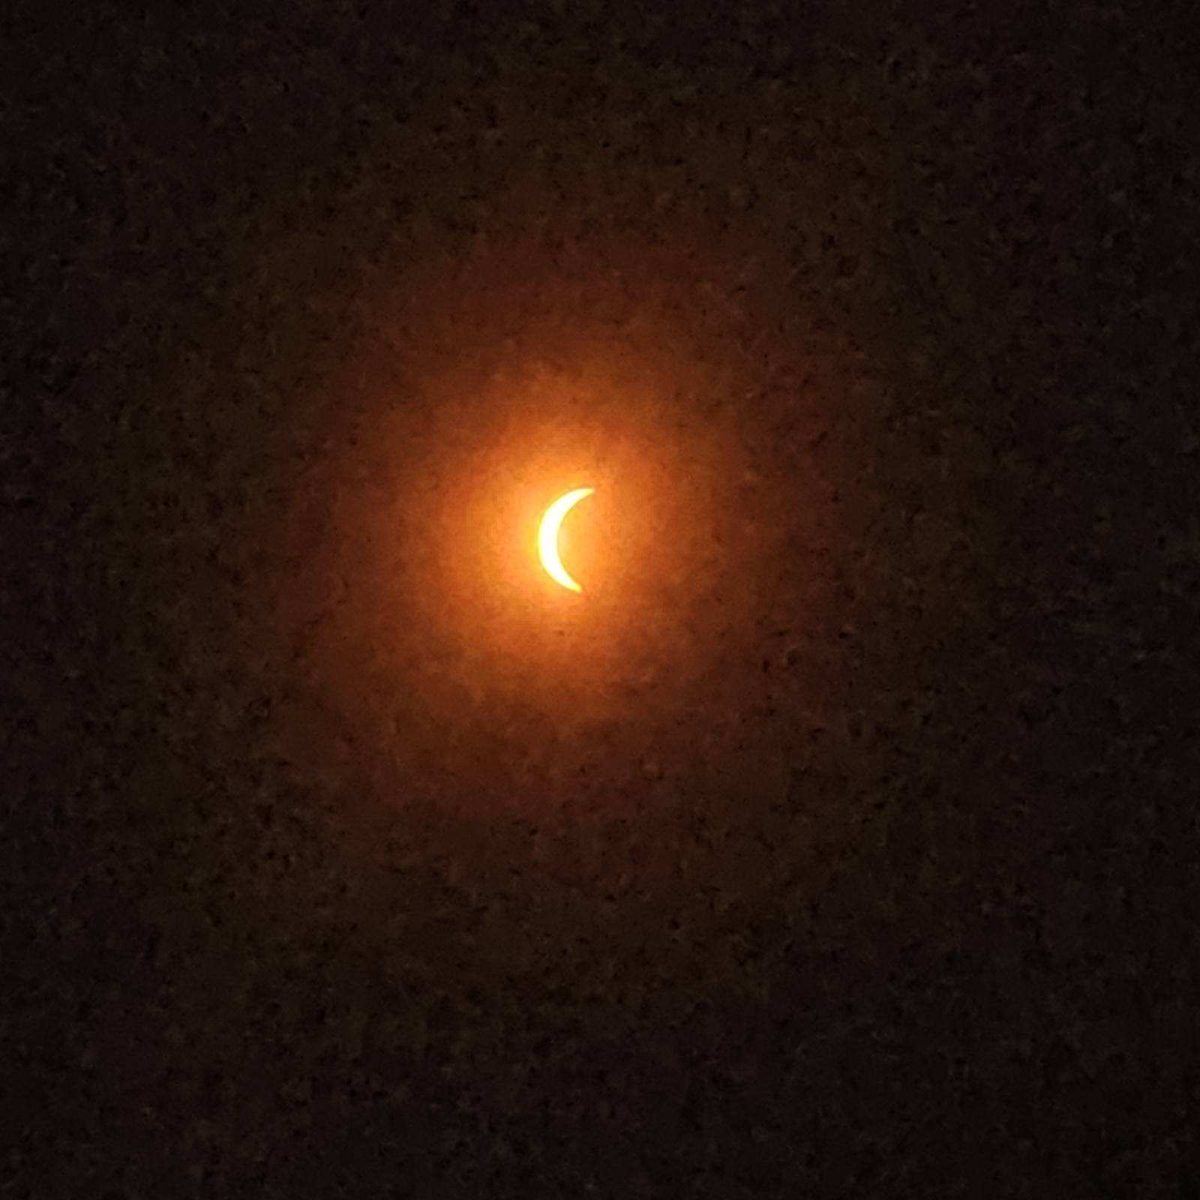 The Solar Eclipse at 1:41 p.m. in Clarkson, AR.